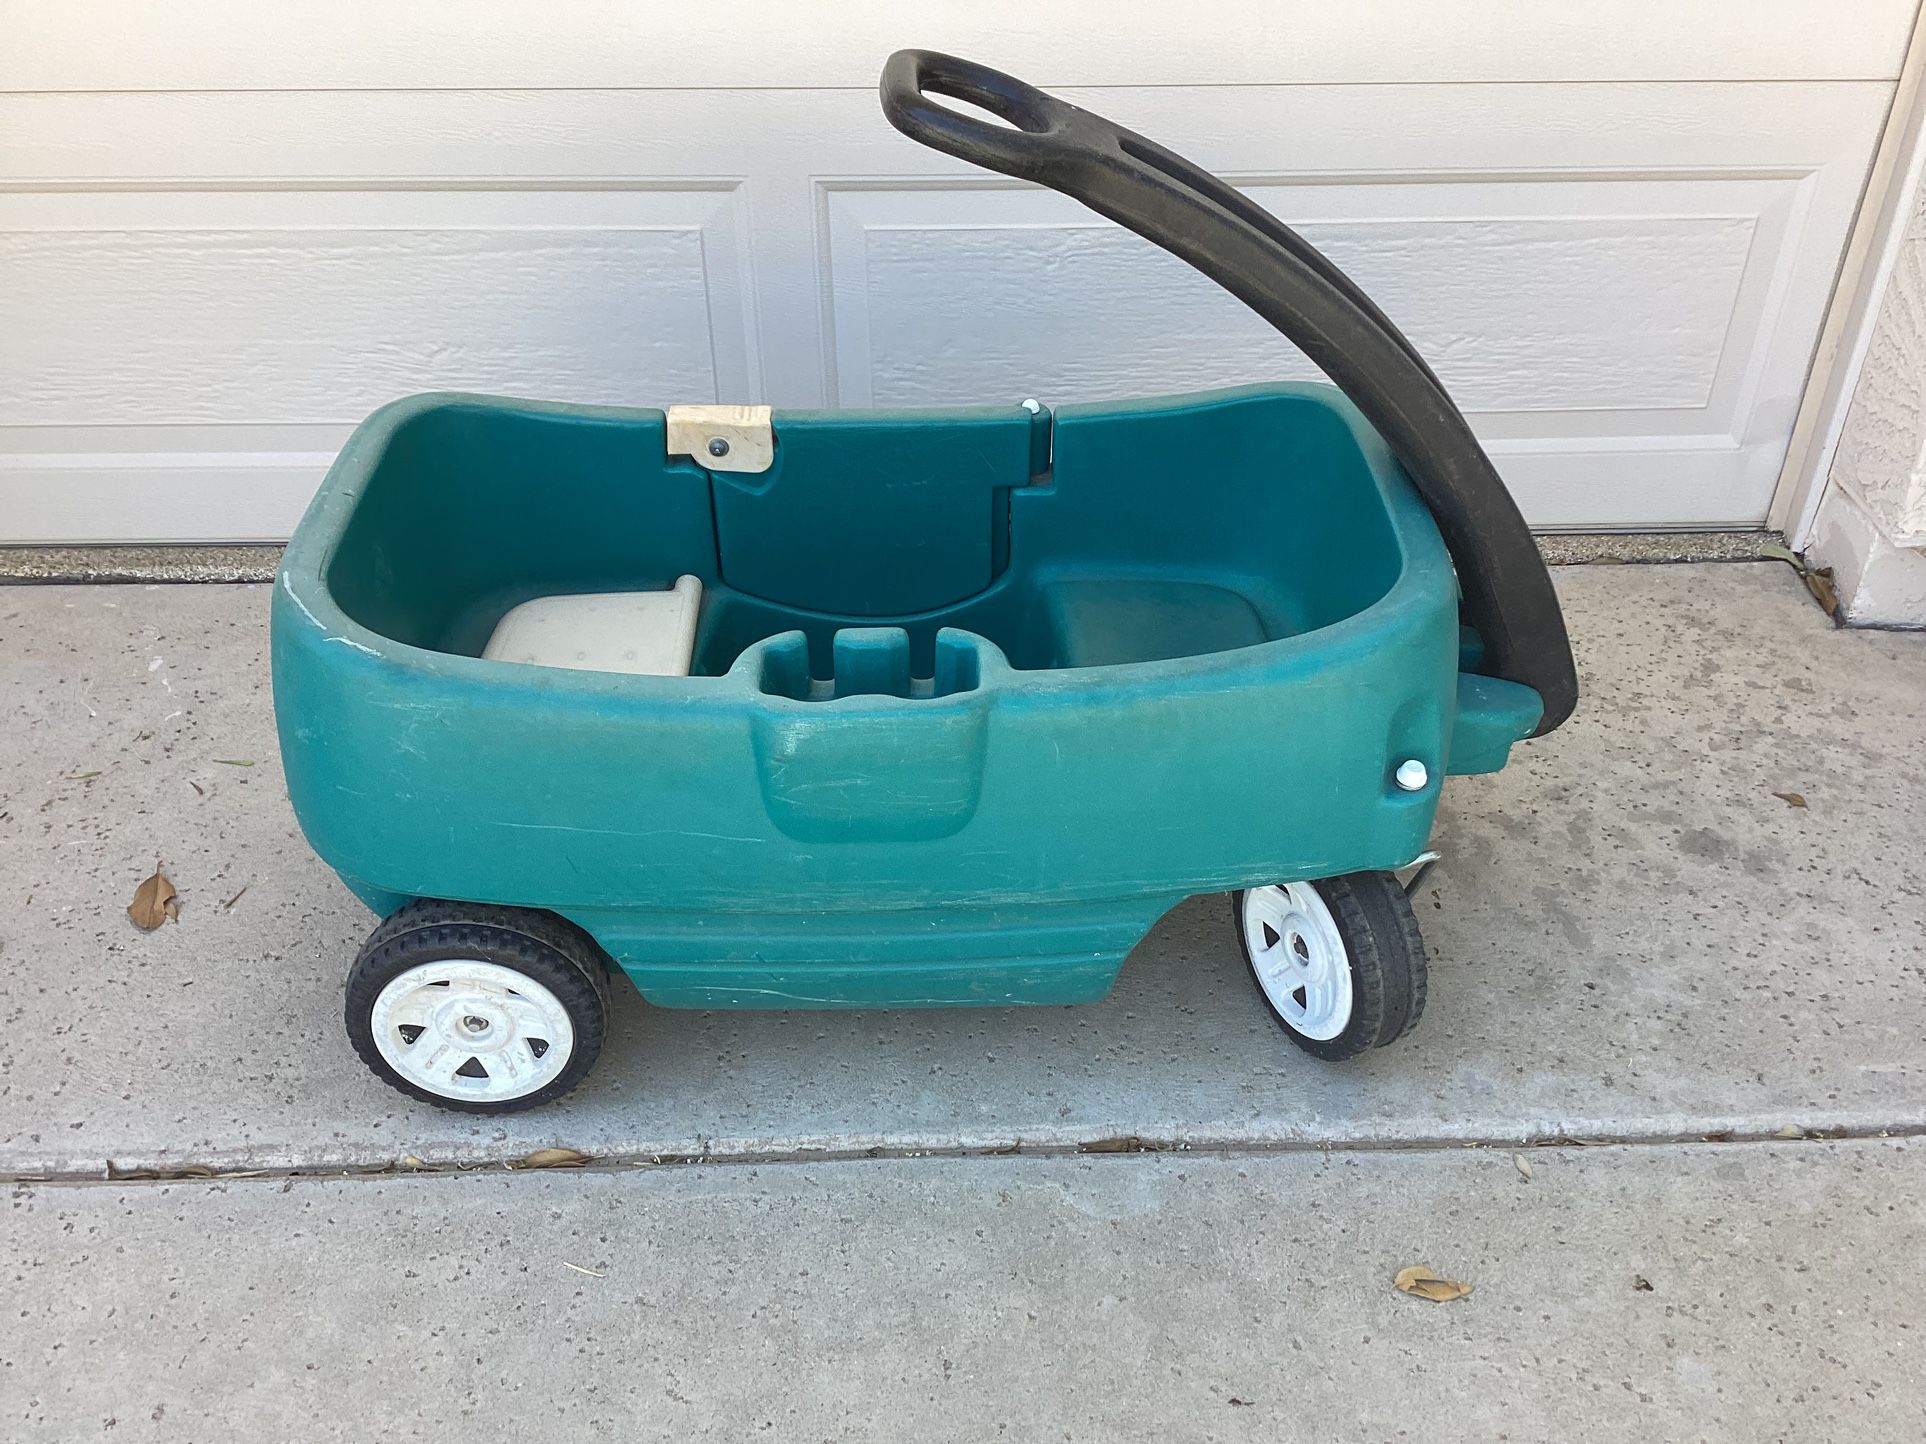 Child’s Wagon By “Step2”